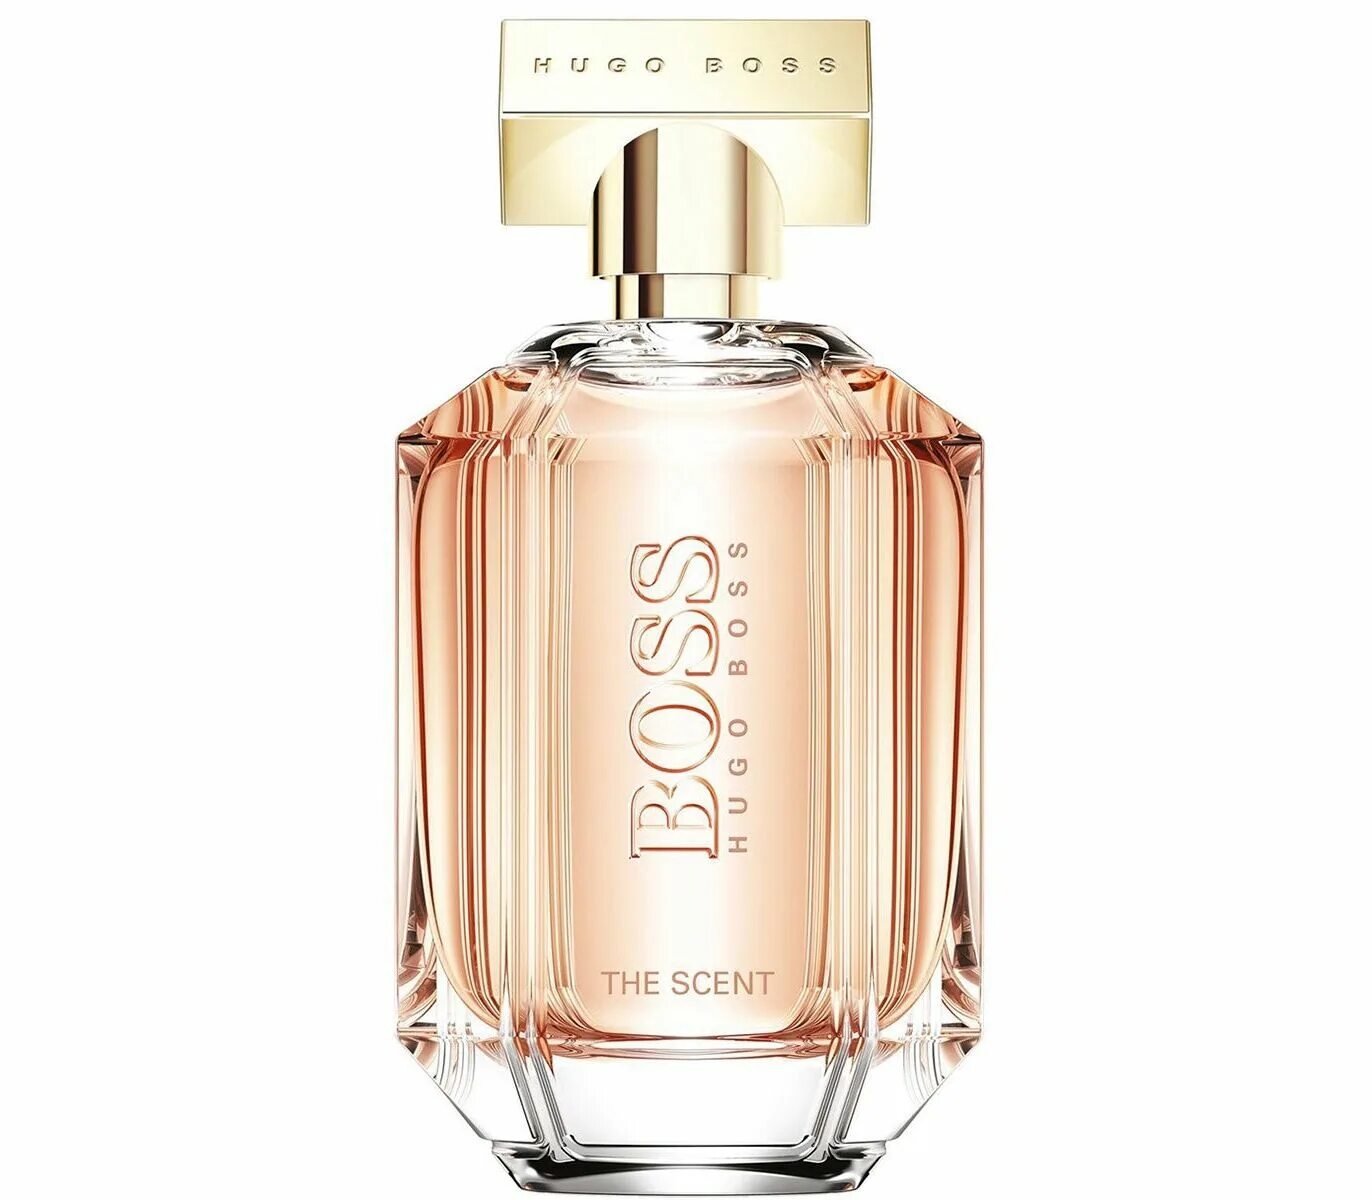 Hugo boss the scent женский. Парфюм Хьюго босс женские. Духи Boss Hugo Boss женские. Hugo Boss the Scent for her. Хьюго босс женские the Scent for her.